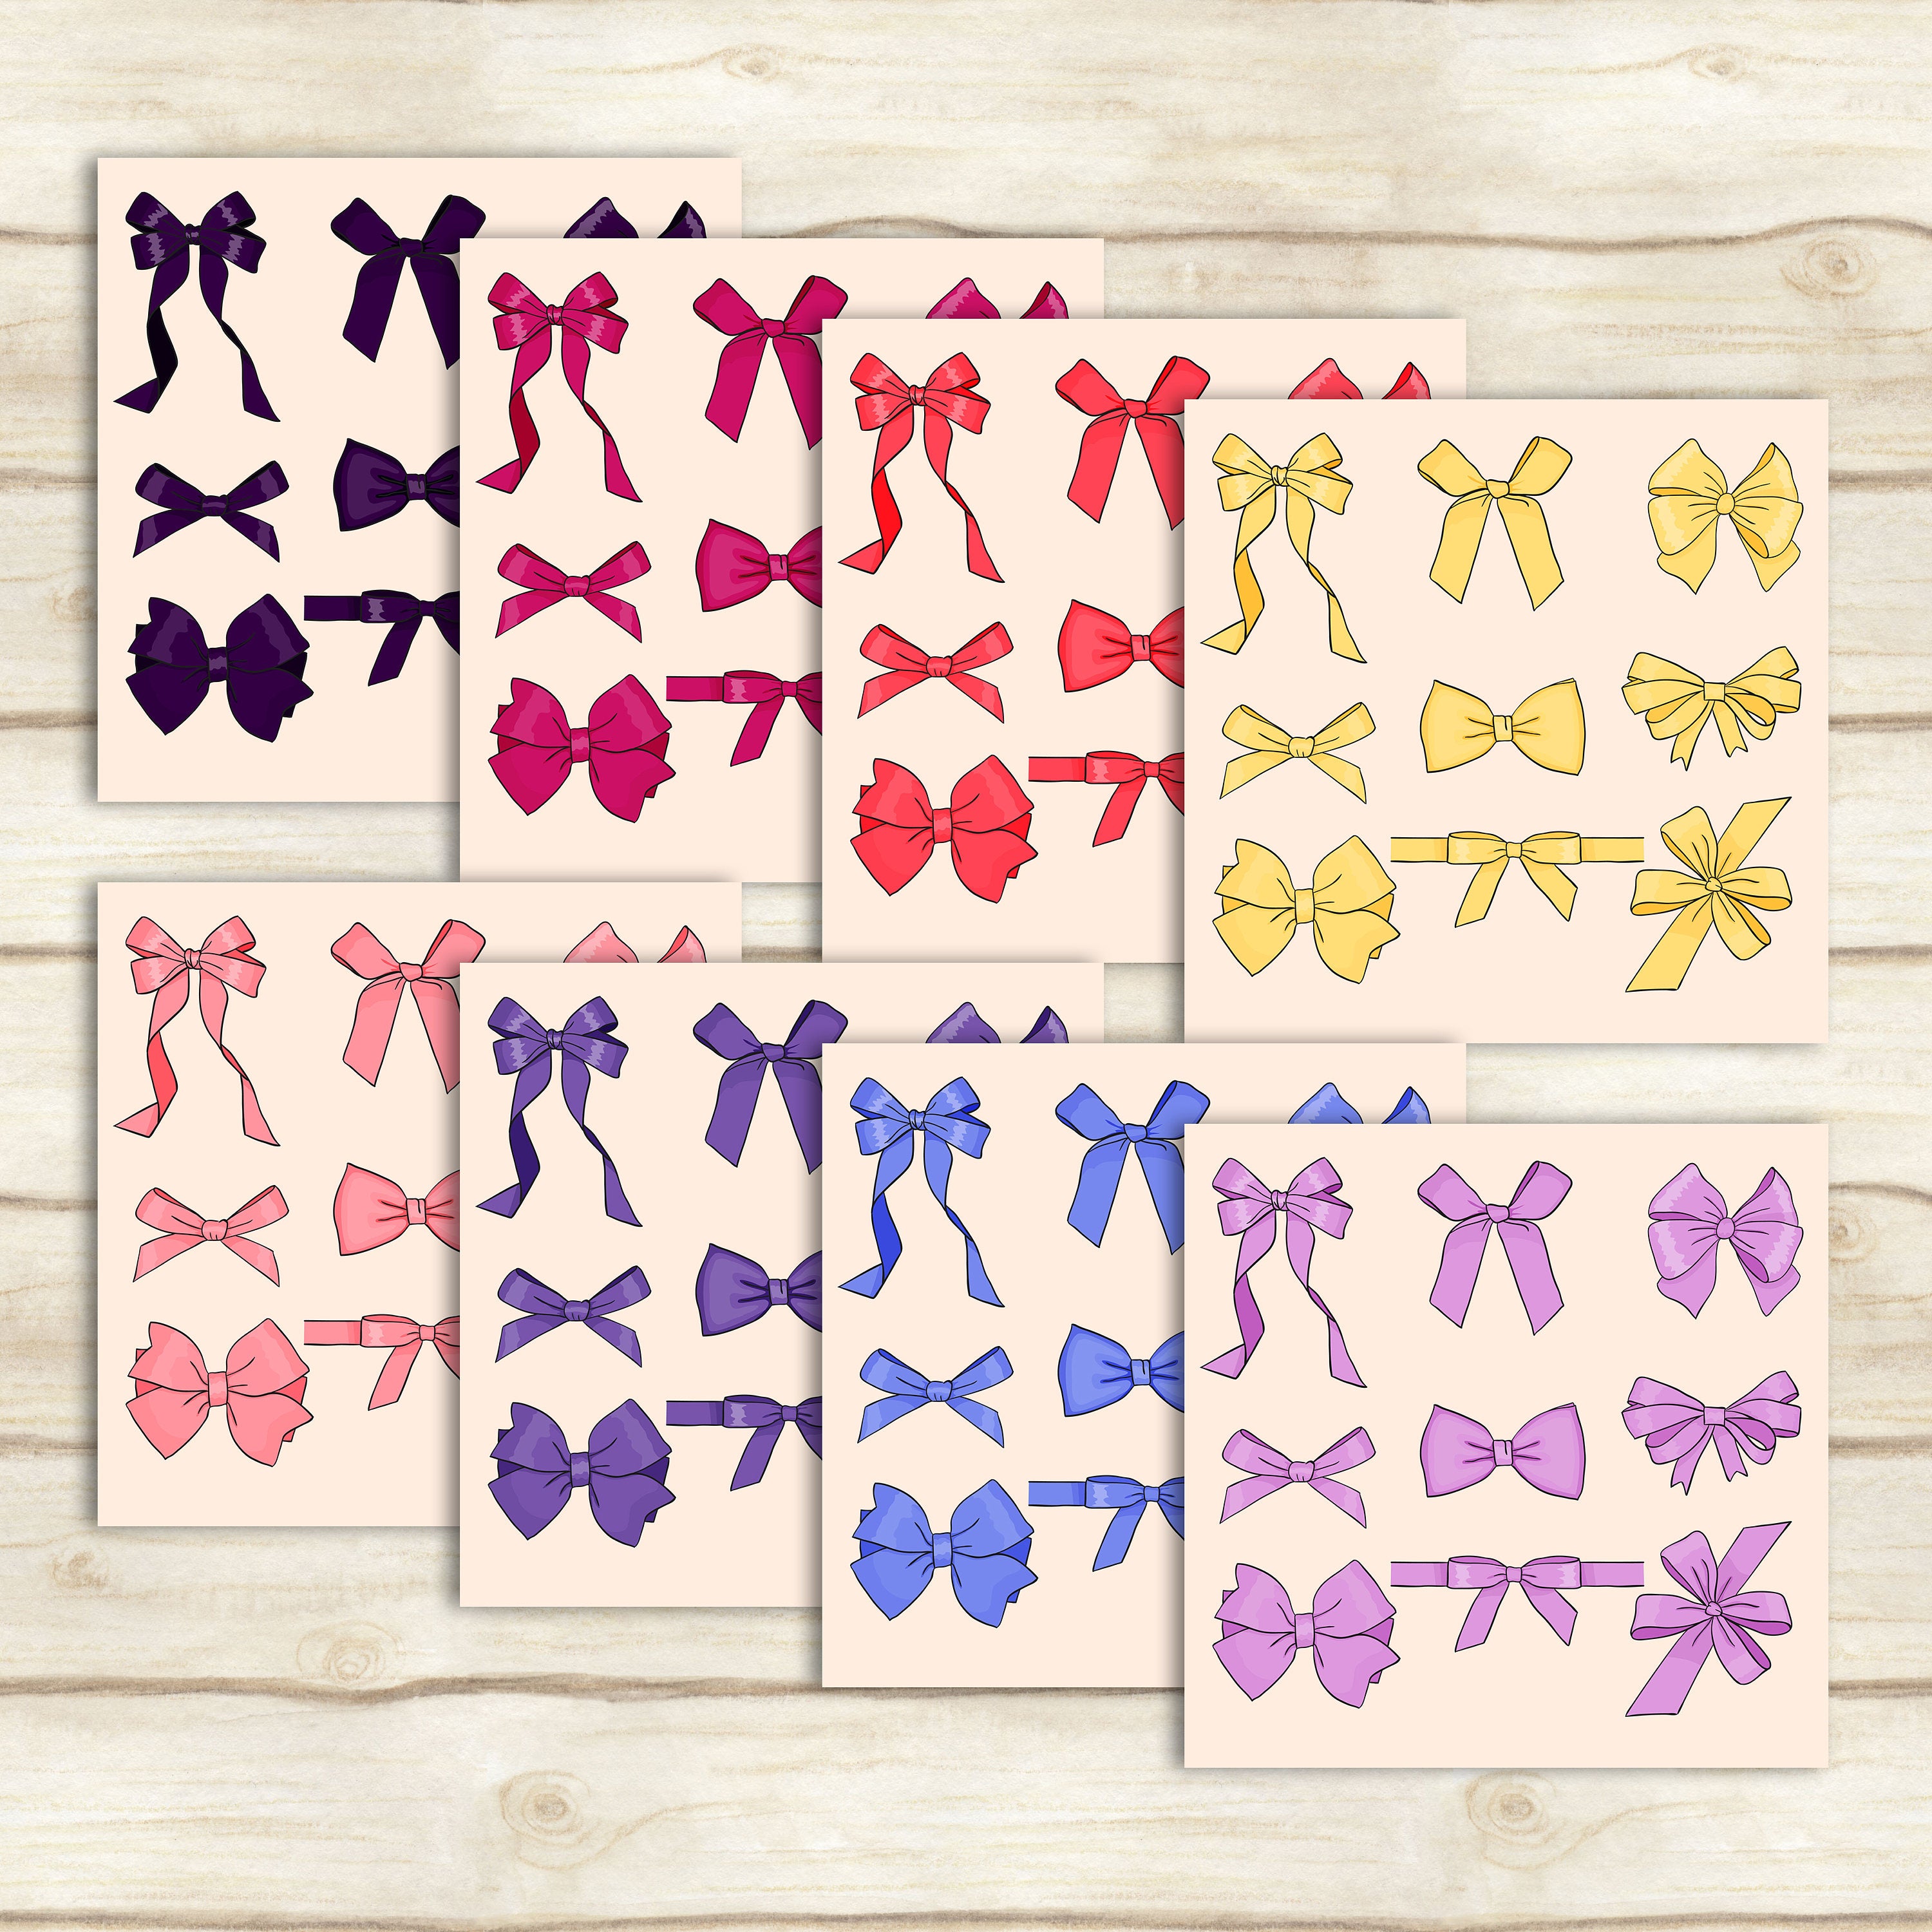 216 Bow Clip Arts, Instant Download, High Resolution 300 Dpi, Separate and Transparent Clip Arts, Princess Theme Clip Arts, Commercial Use